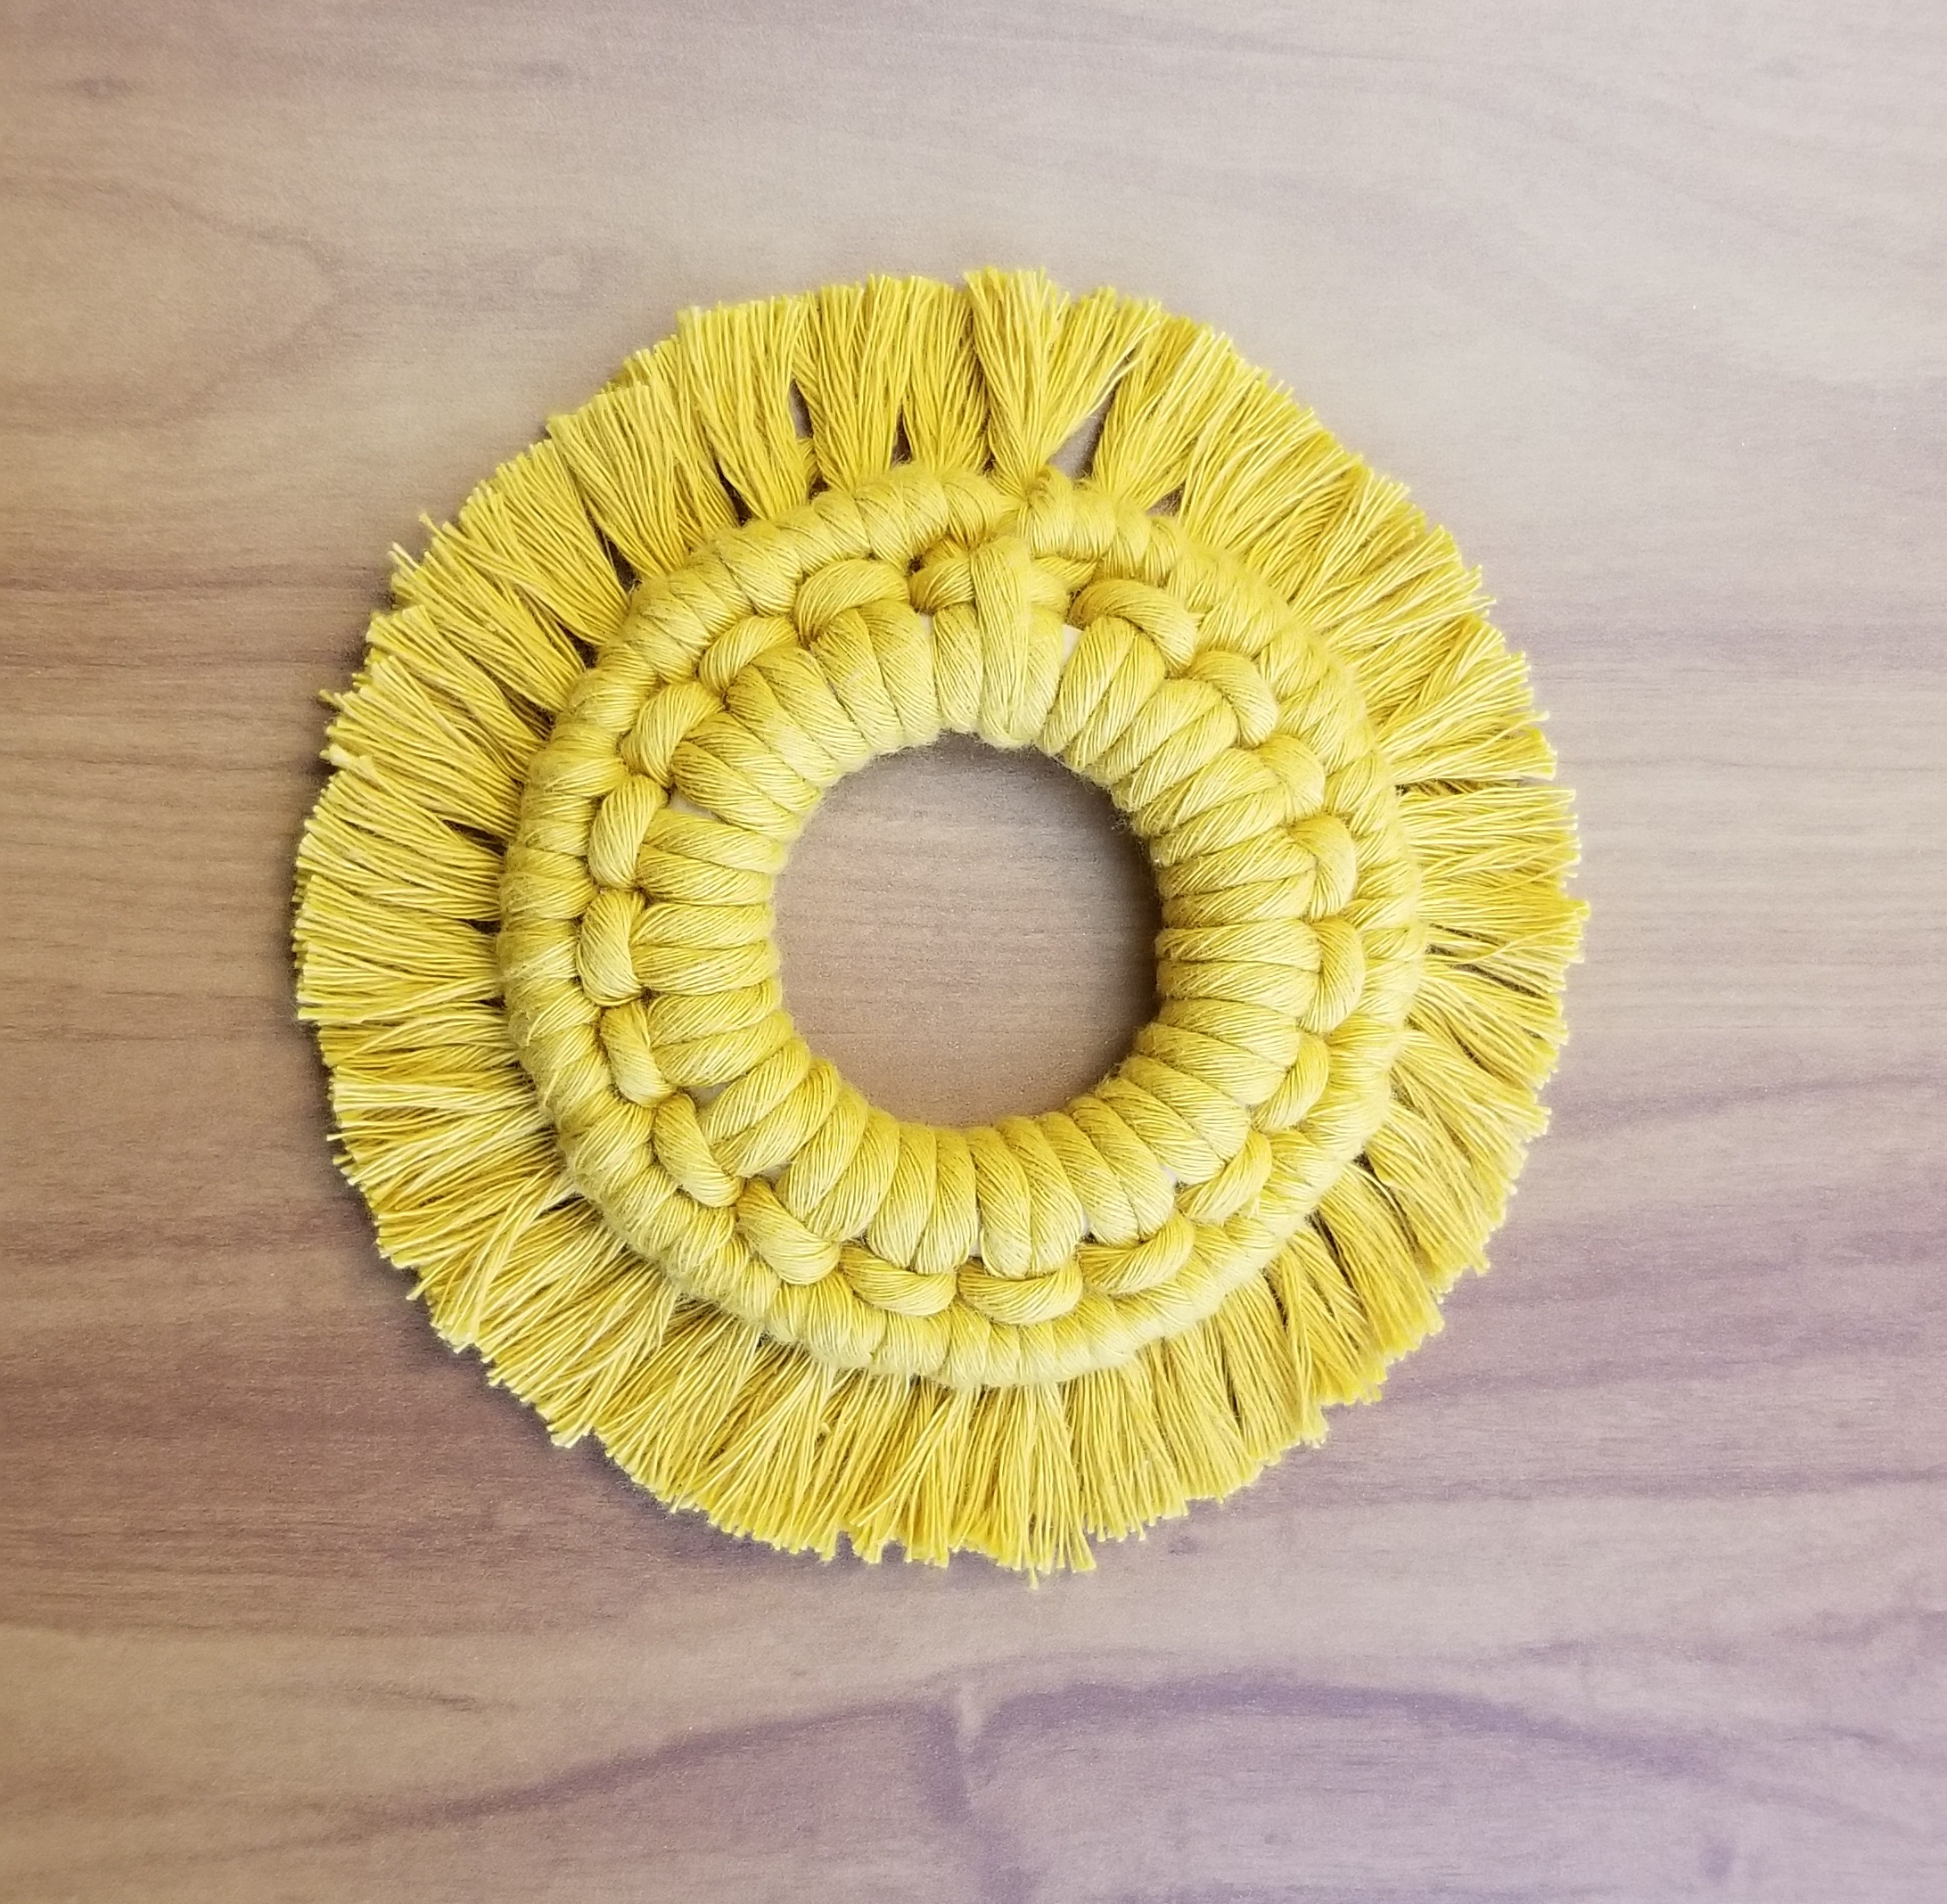 A yellow macrame sun wreath; it is a circle with an open center, and then repeating knots around a ring. Moving outward from the knots are fringe pieces, making the whole thing look like a sun.at the 